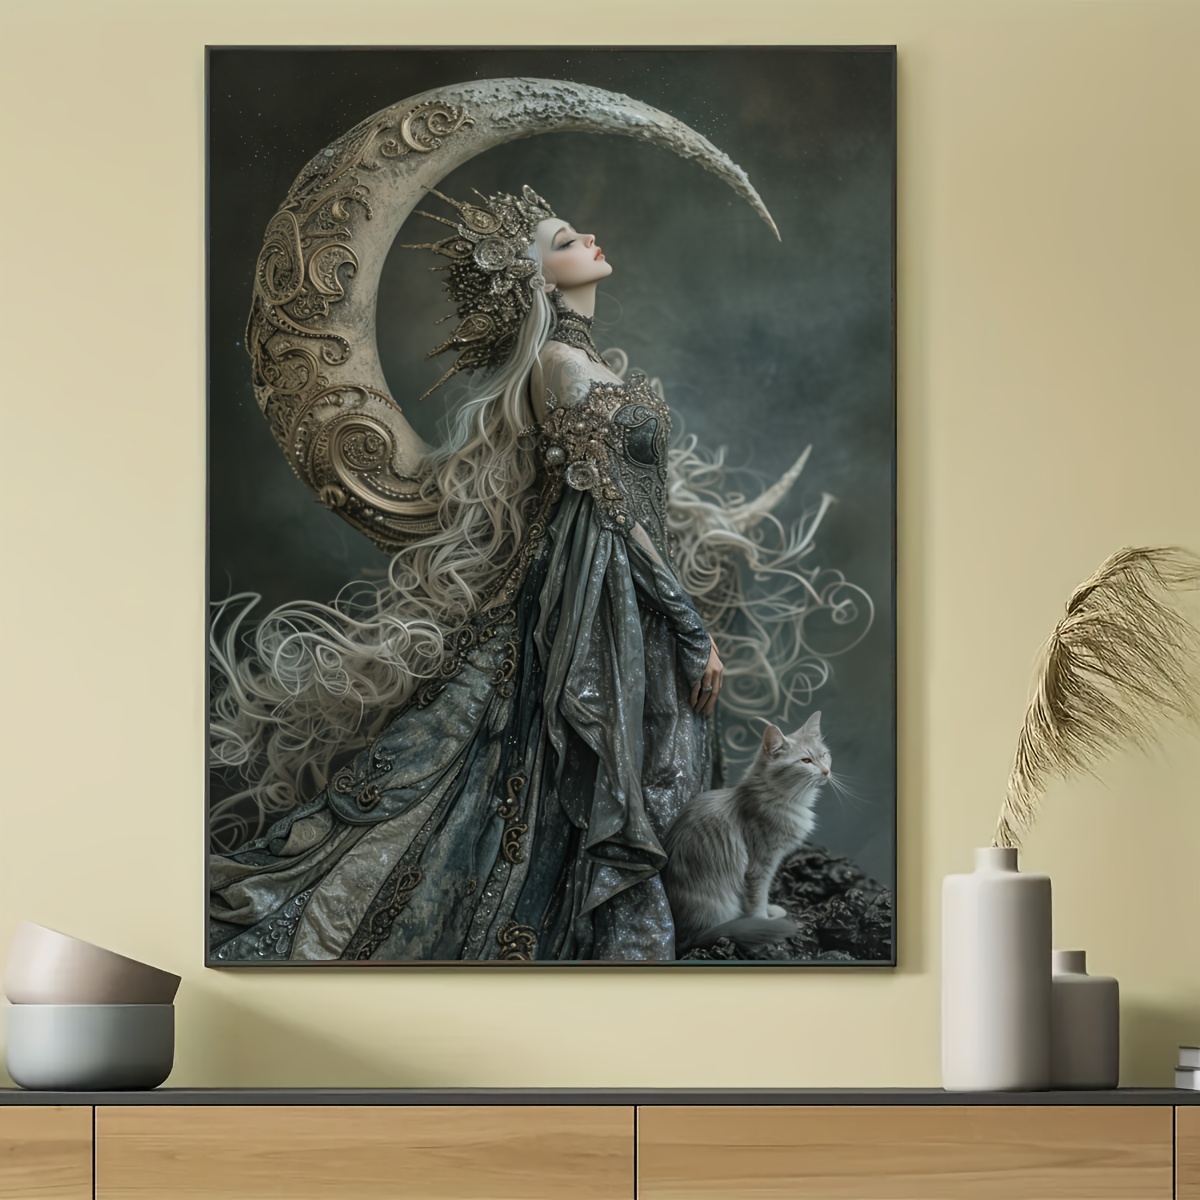 

Moon Goddess Canvas Wall Art - Frameless Poster For Living Room, Bedroom, Kitchen, Office & Cafe Decor - Perfect Gift Idea